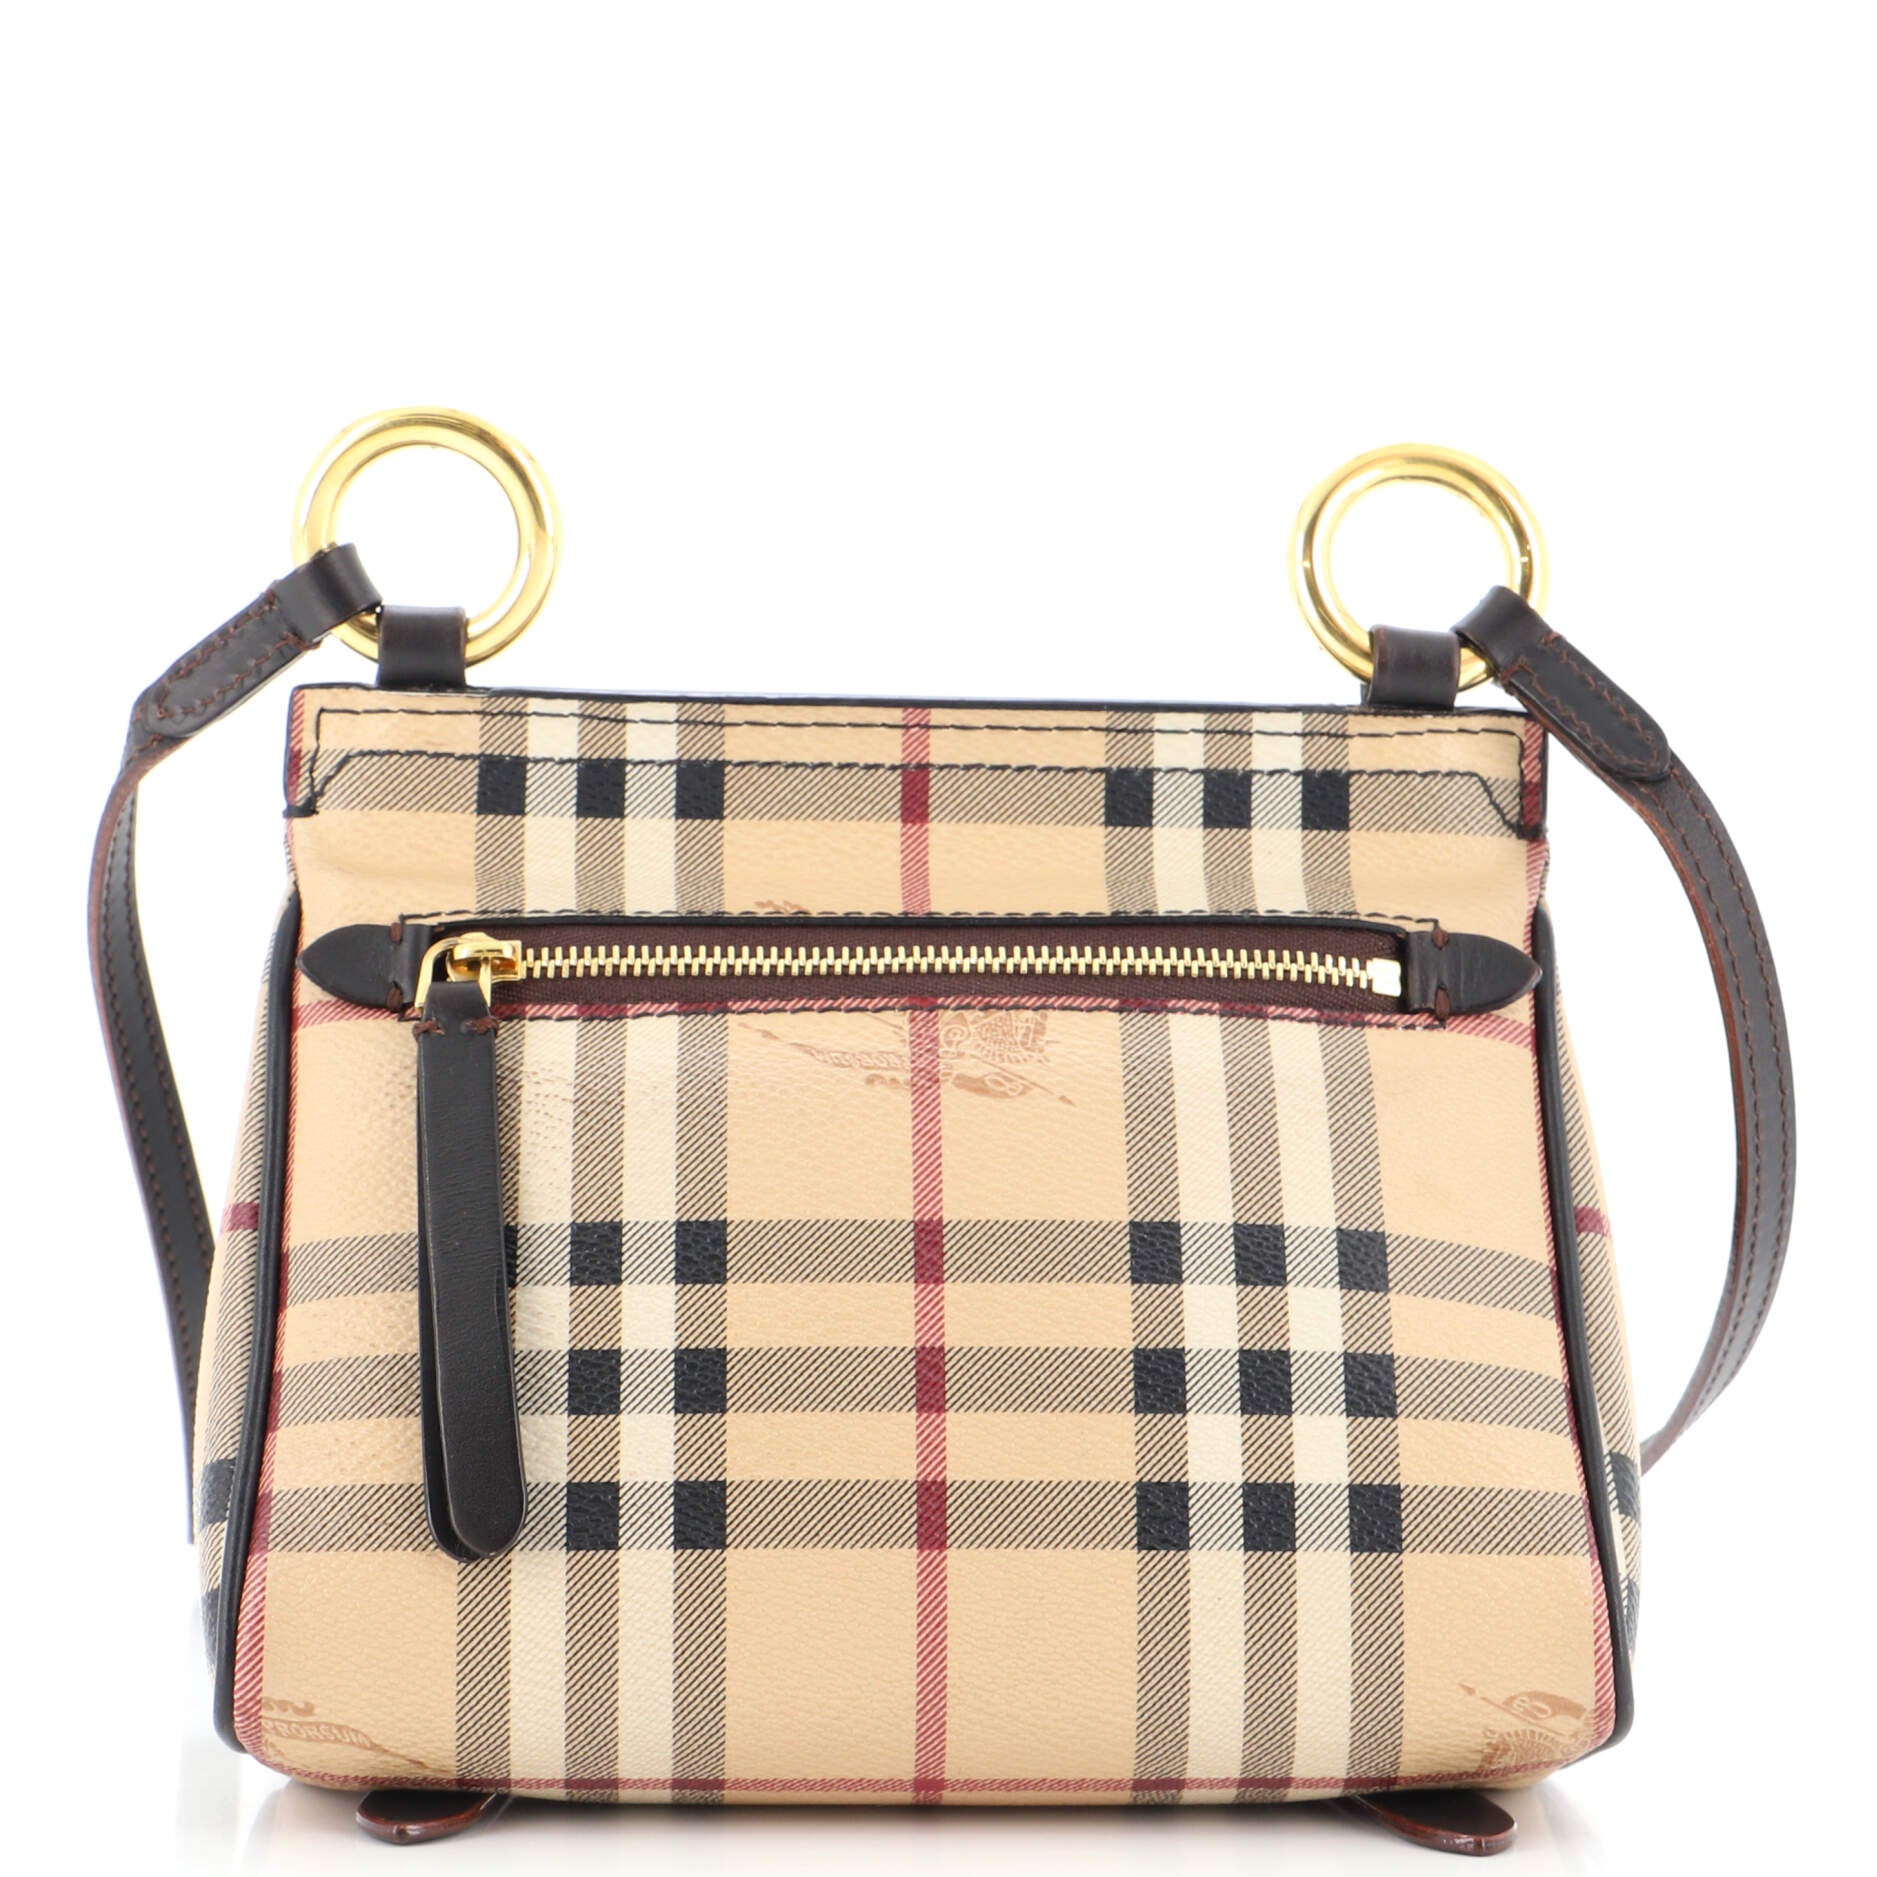 Burberry Bridle Saddle Bag Leather and Haymarket Check Coated Canvas Baby